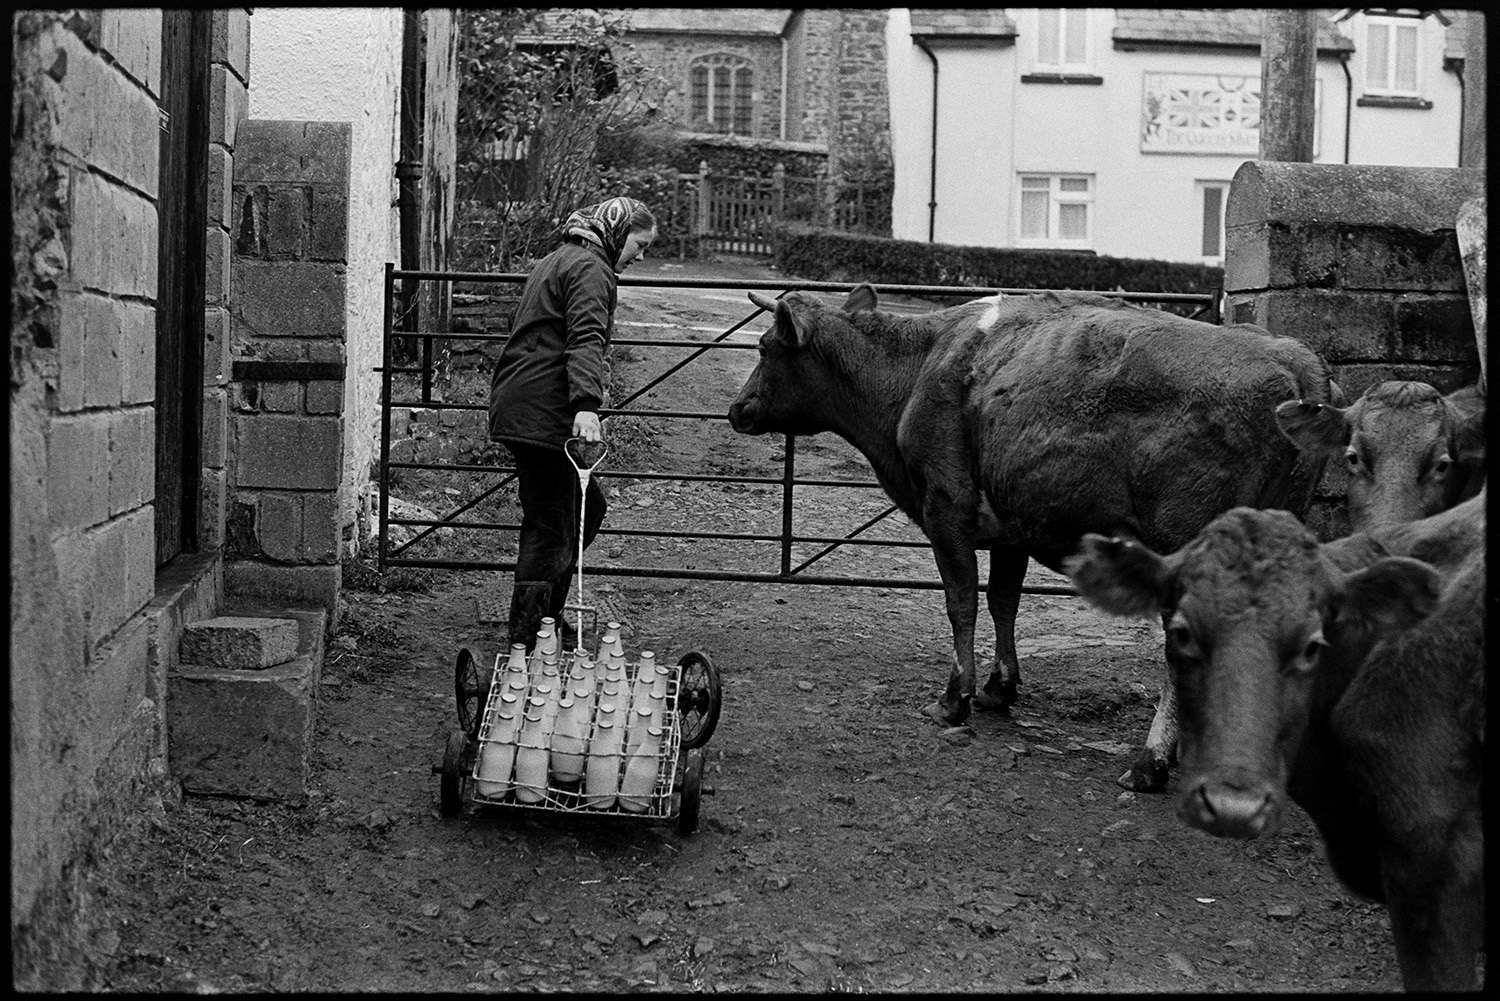 Woman loading milk trolley and setting off round village. 
[Susan Woolacott pulling a trolley loaded with milk bottles through the farmyard at Verdun, Atherington. Se is opening a gate to leave the farm and deliver the milk around the village of Atherington. Three cows are watching her.]